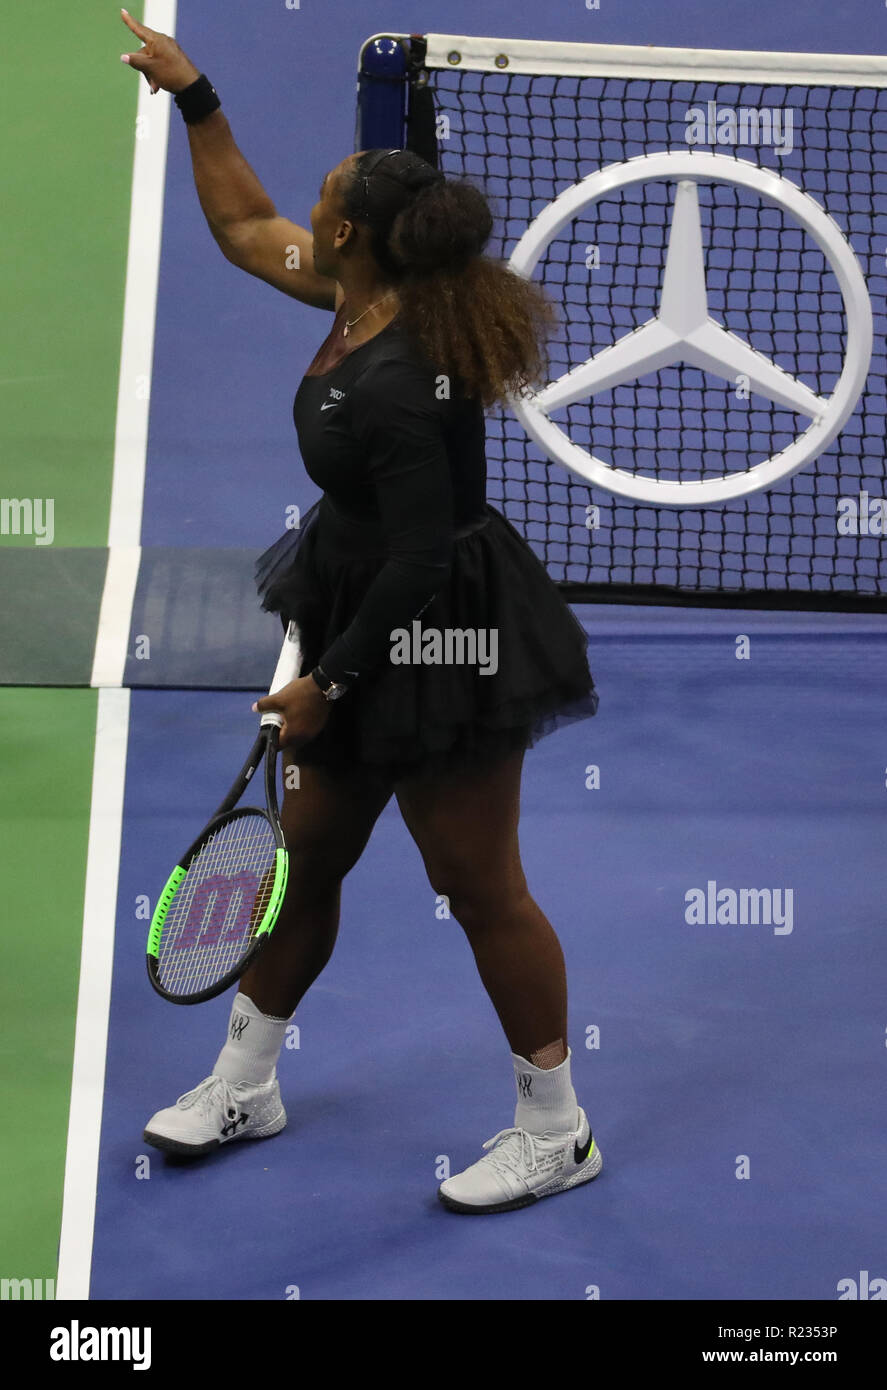 23-time Grand Slam champion Serena Williams argues with chair umpire Carlos Ramos during her 2018 US Open final match at National Tennis Center Stock Photo